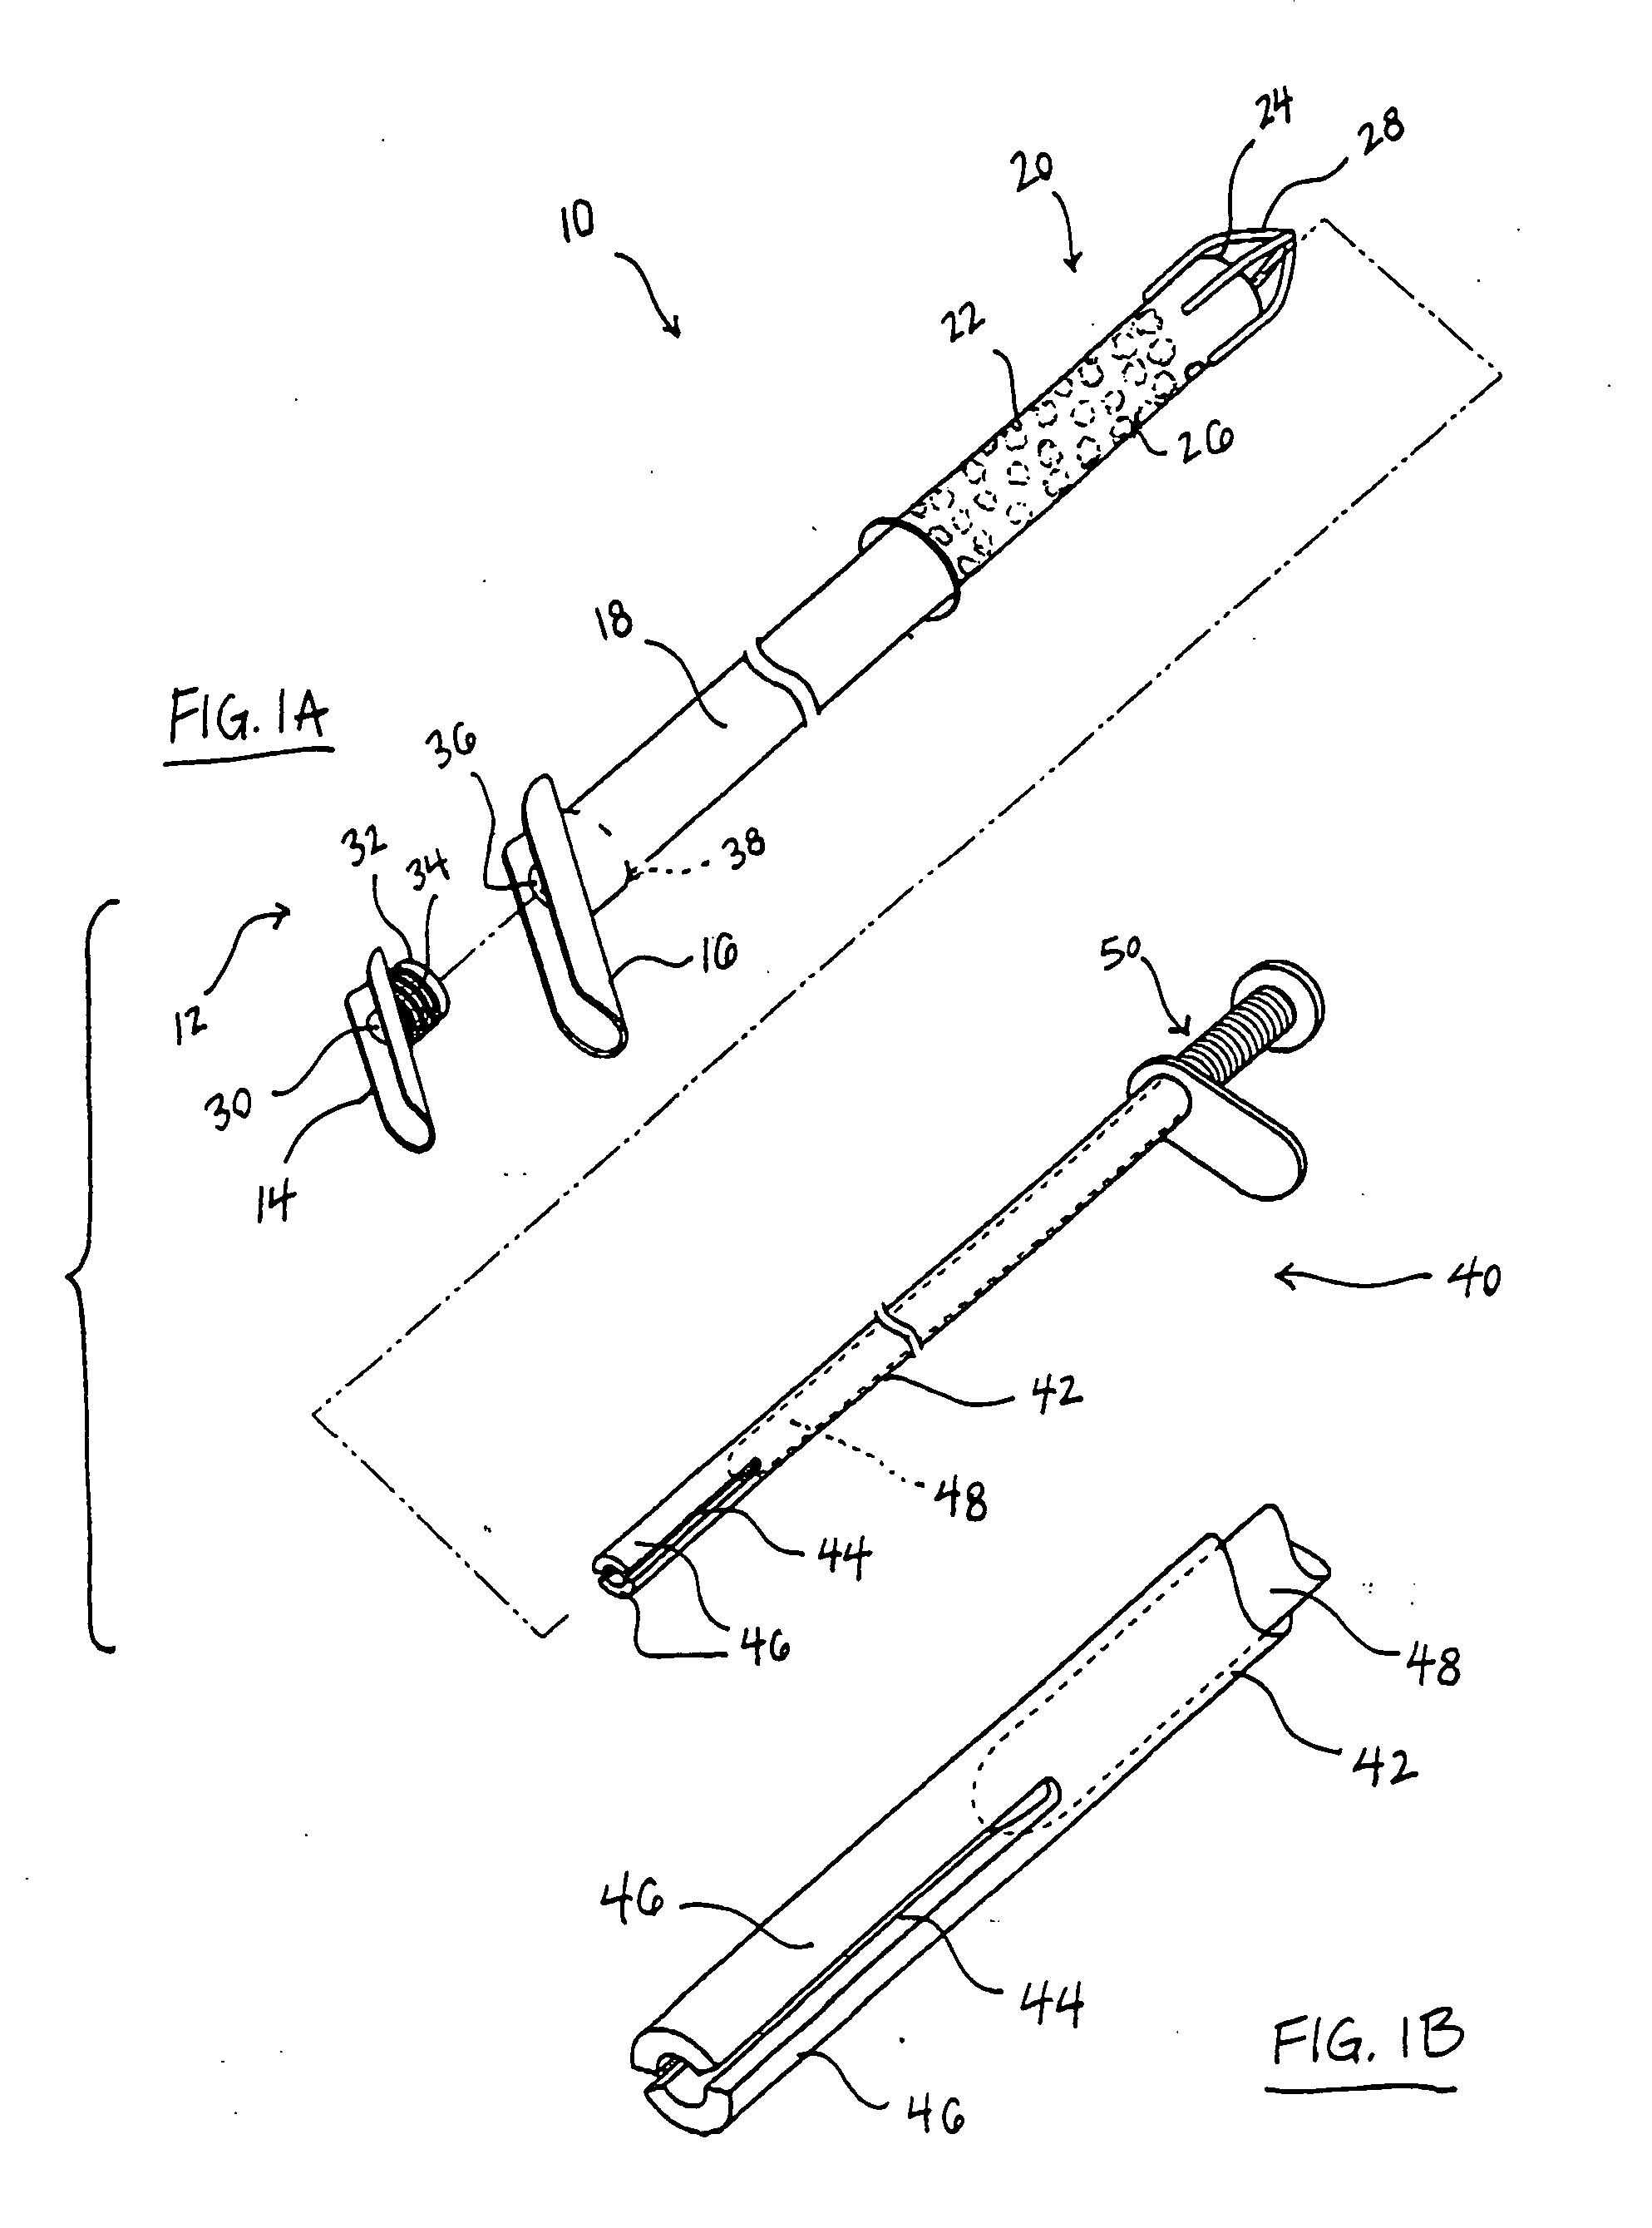 Methods and devices for placing a conduit in fluid communication with a target vessel and a source of blood